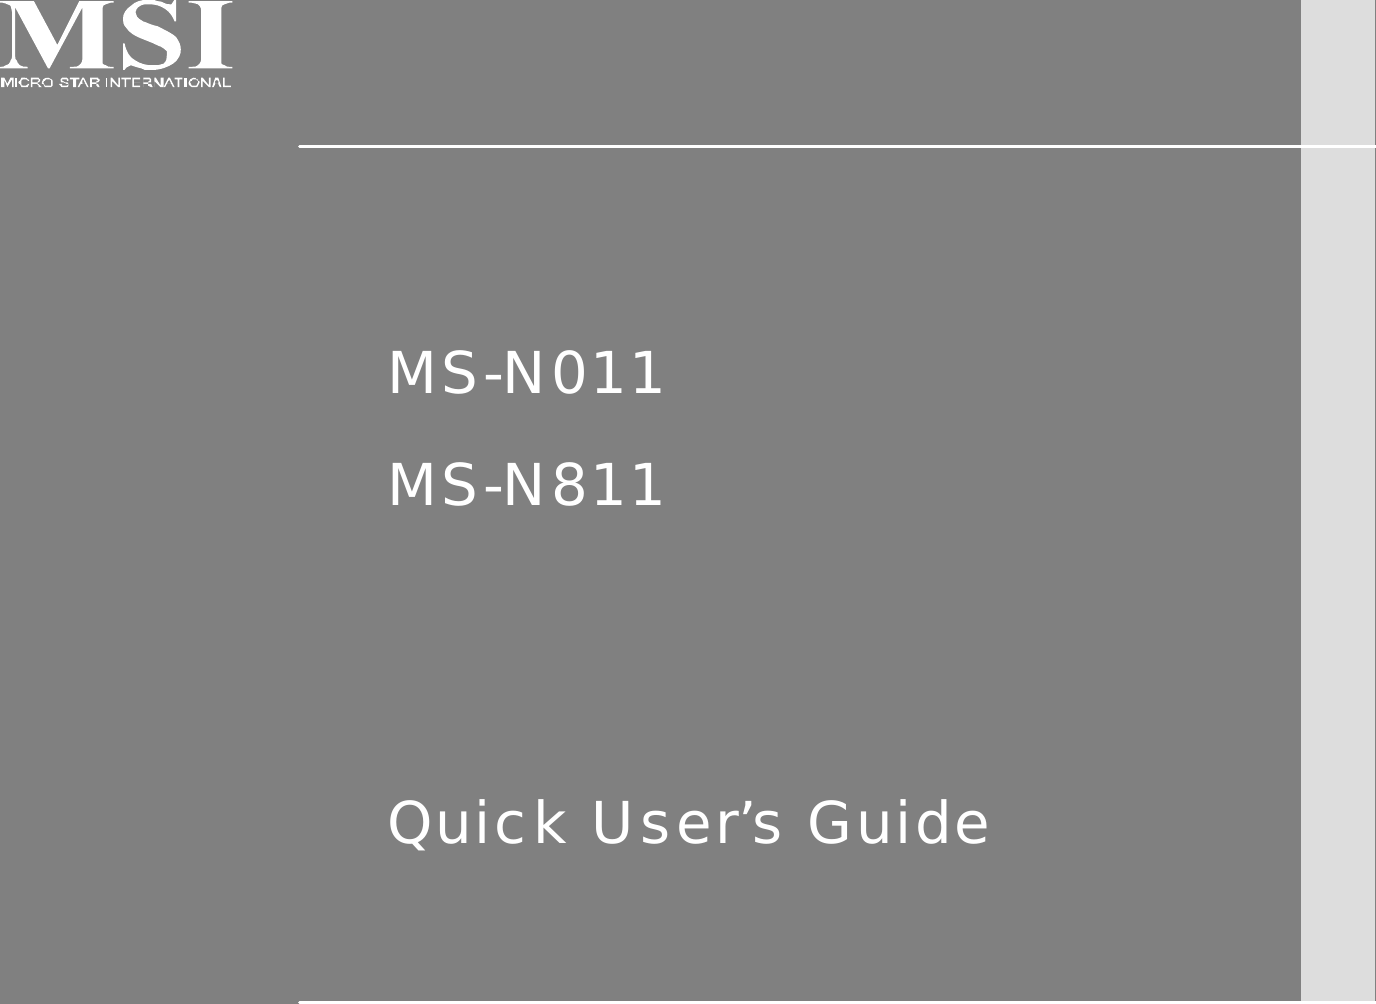      MS-N011  MS-N811   Quick User’s Guide   